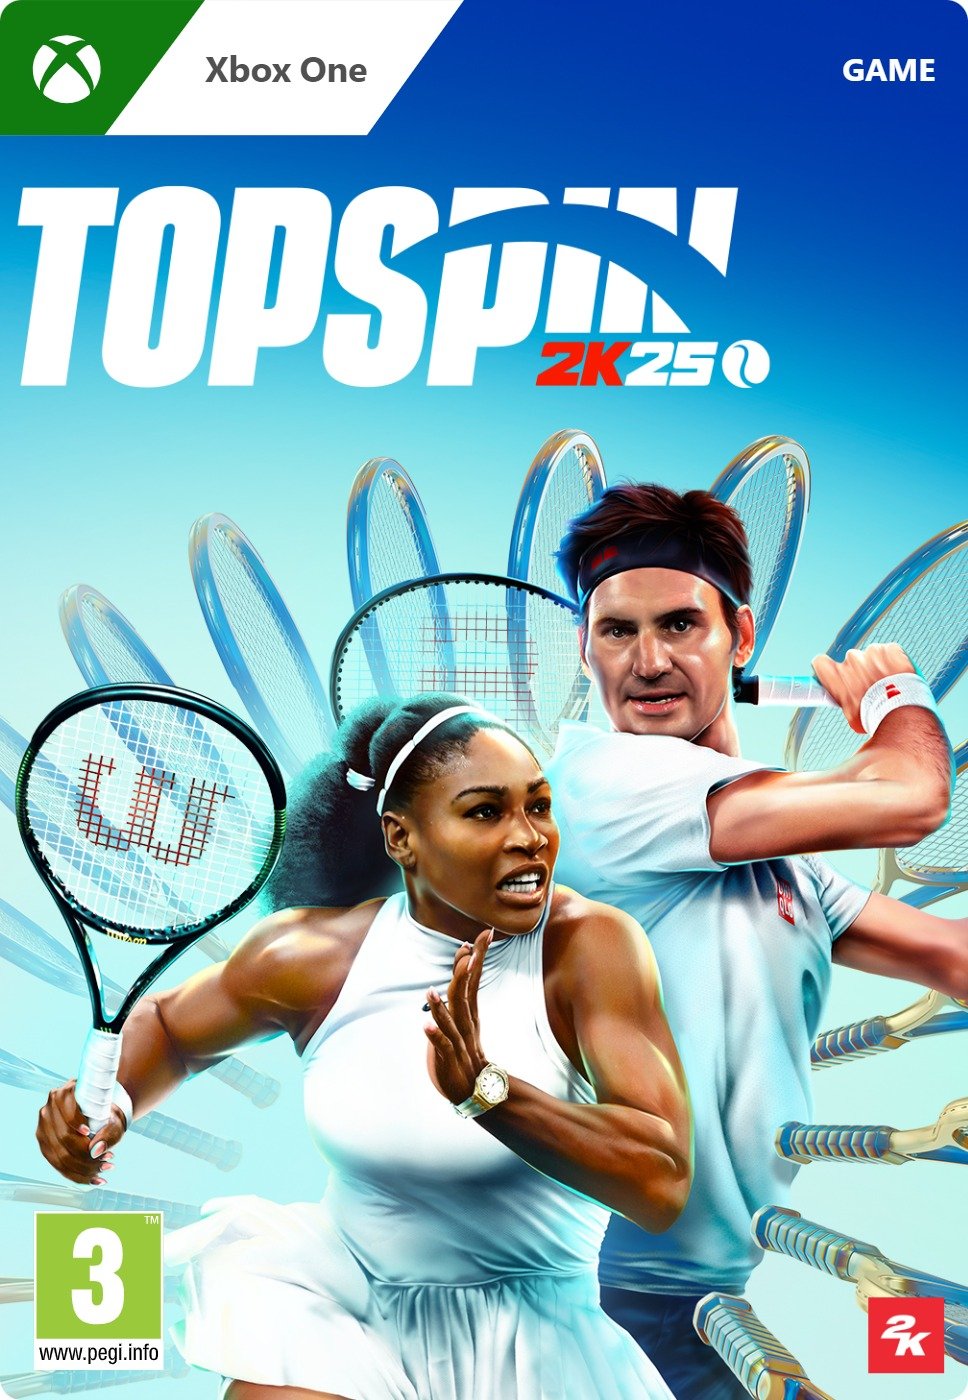 TopSpin 2K25 - for Xbox